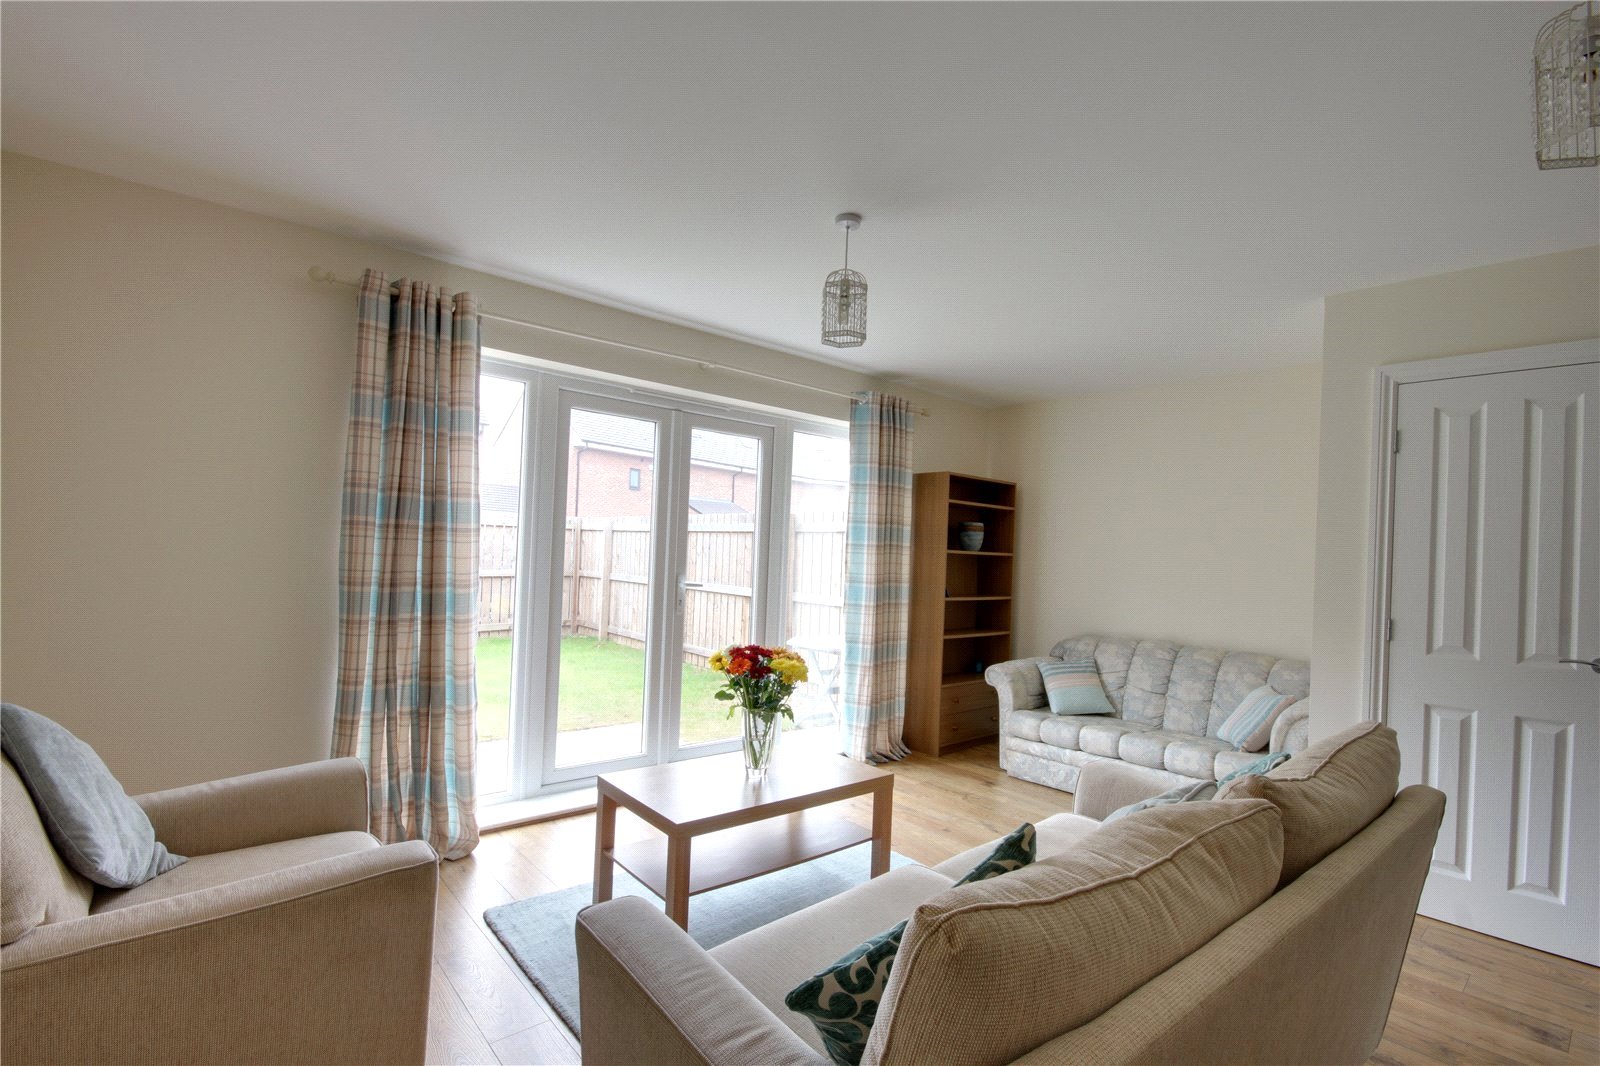 3 bed house for sale in Dorado Close, Stockton-on-Tees 2